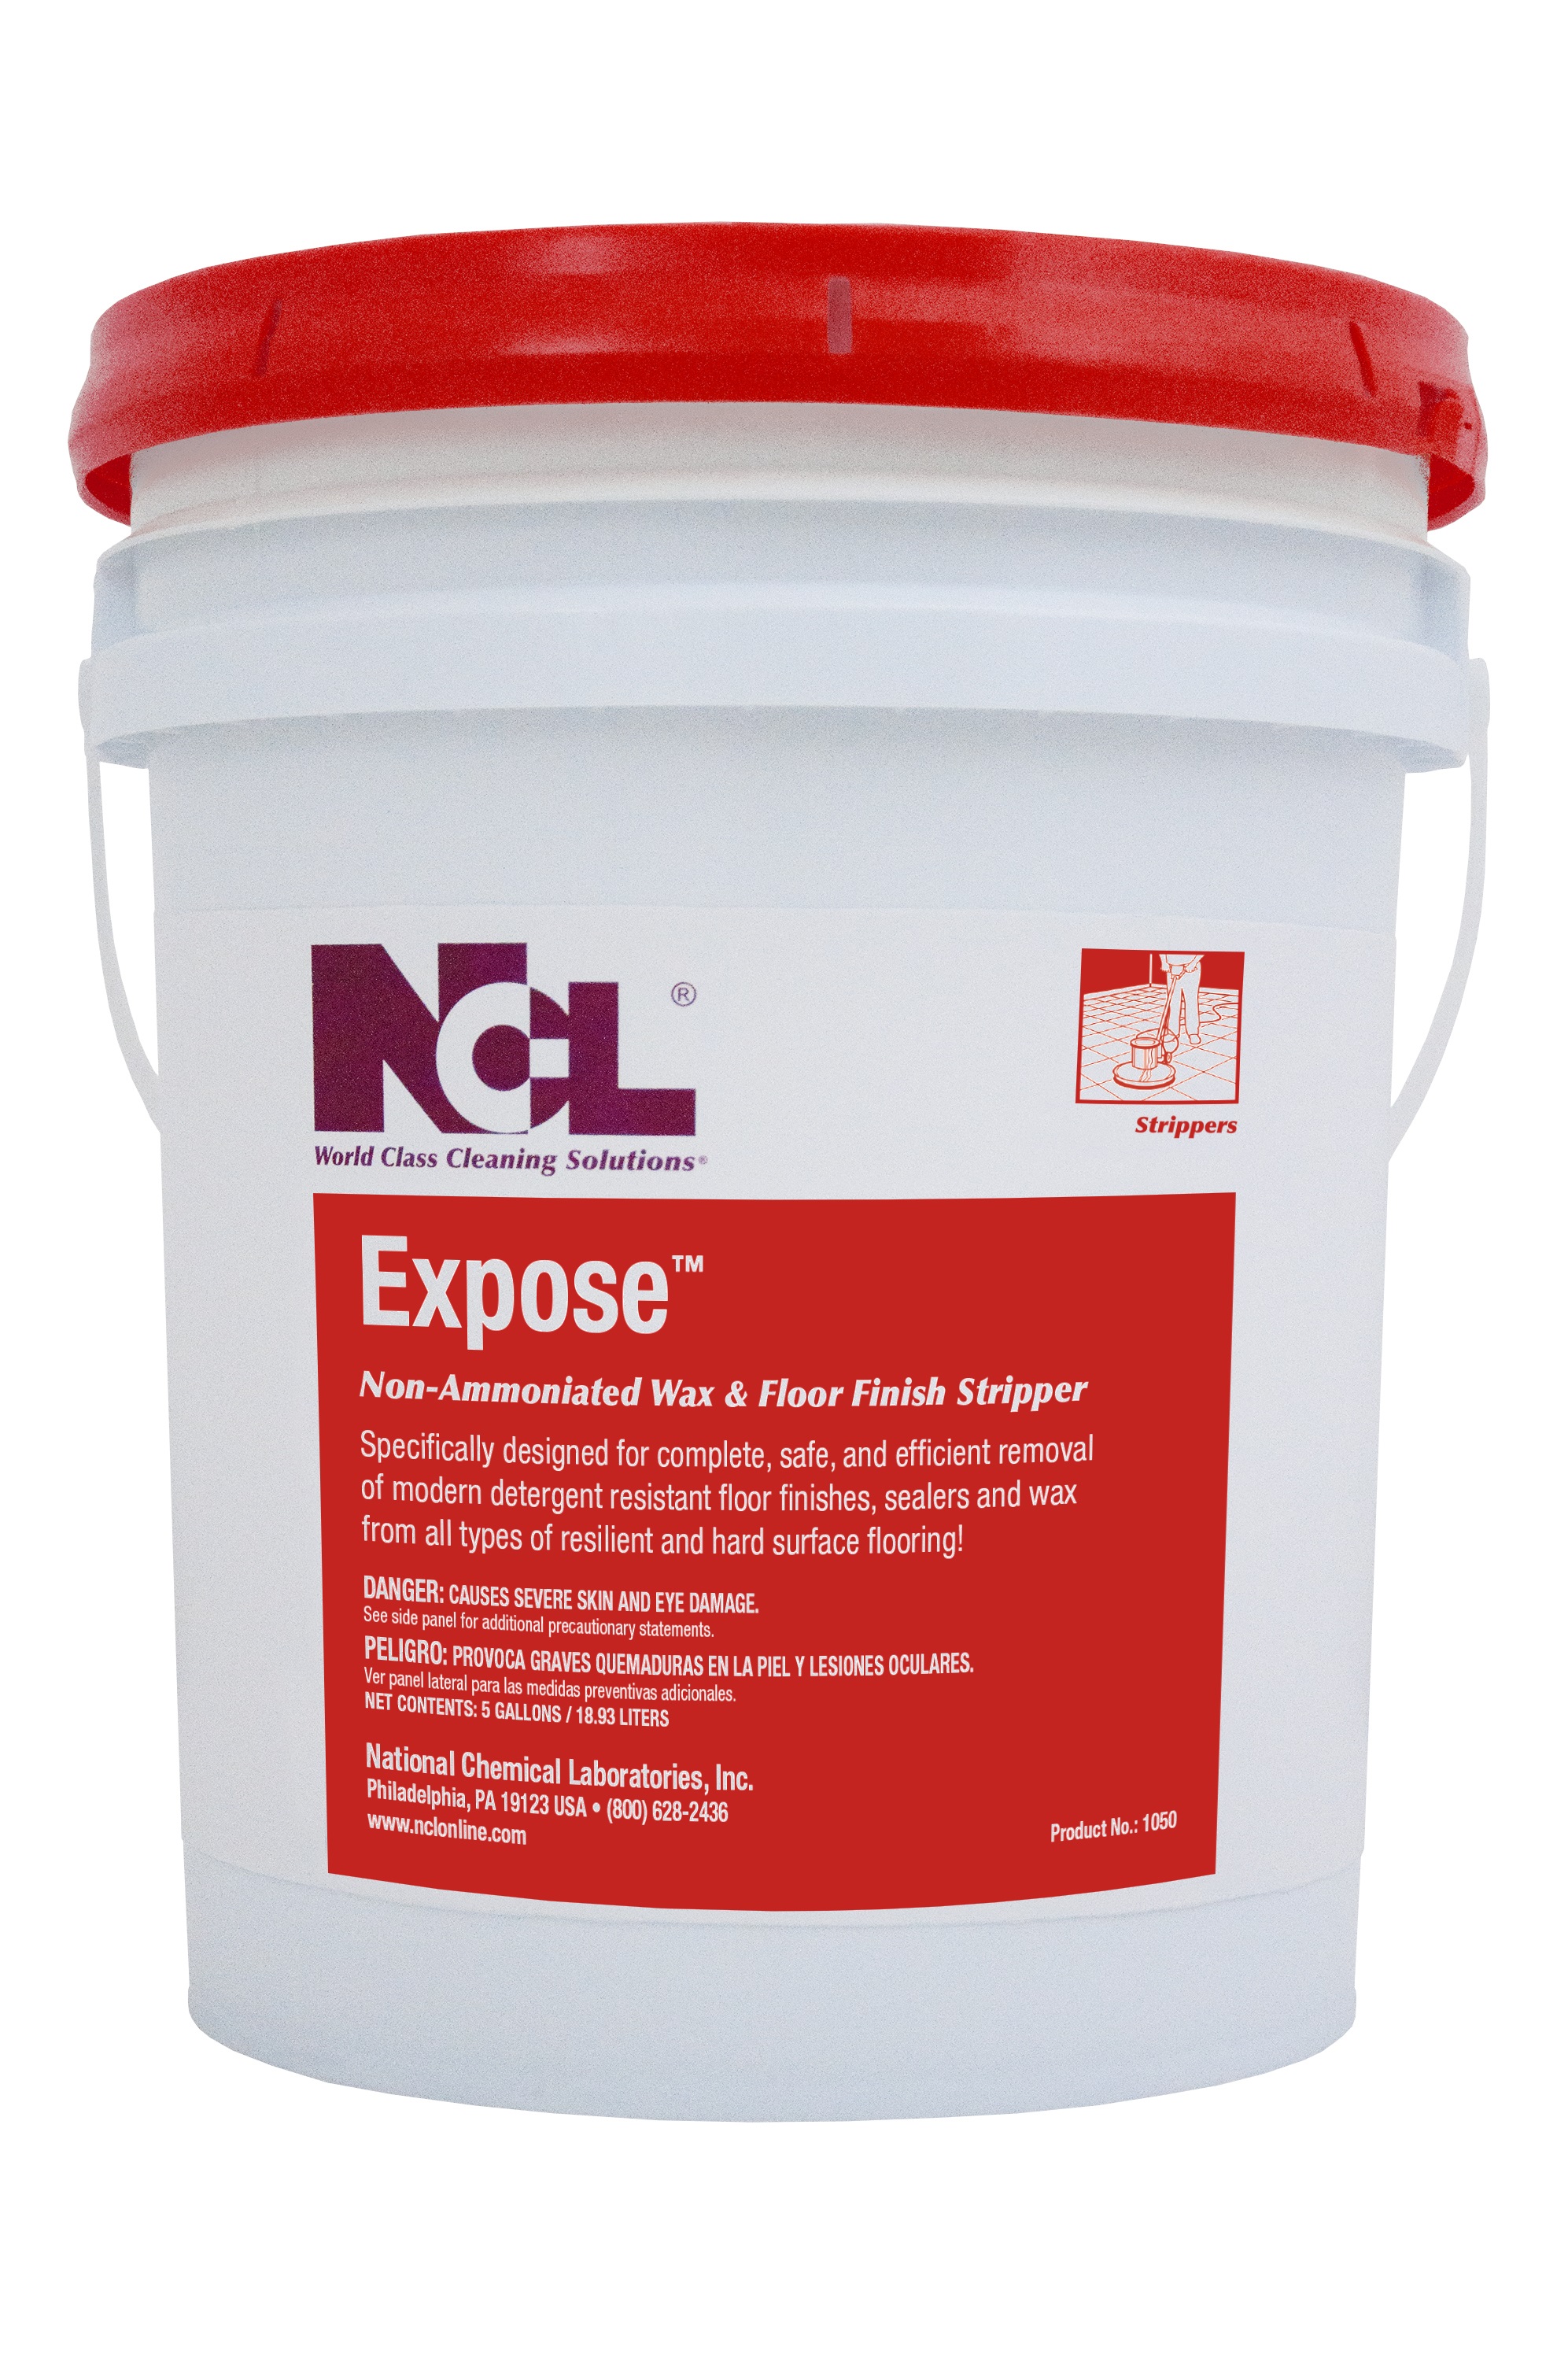 NCL Expose Non-Ammoniated Wax
and Floor Finish Stripper -
(5gal)